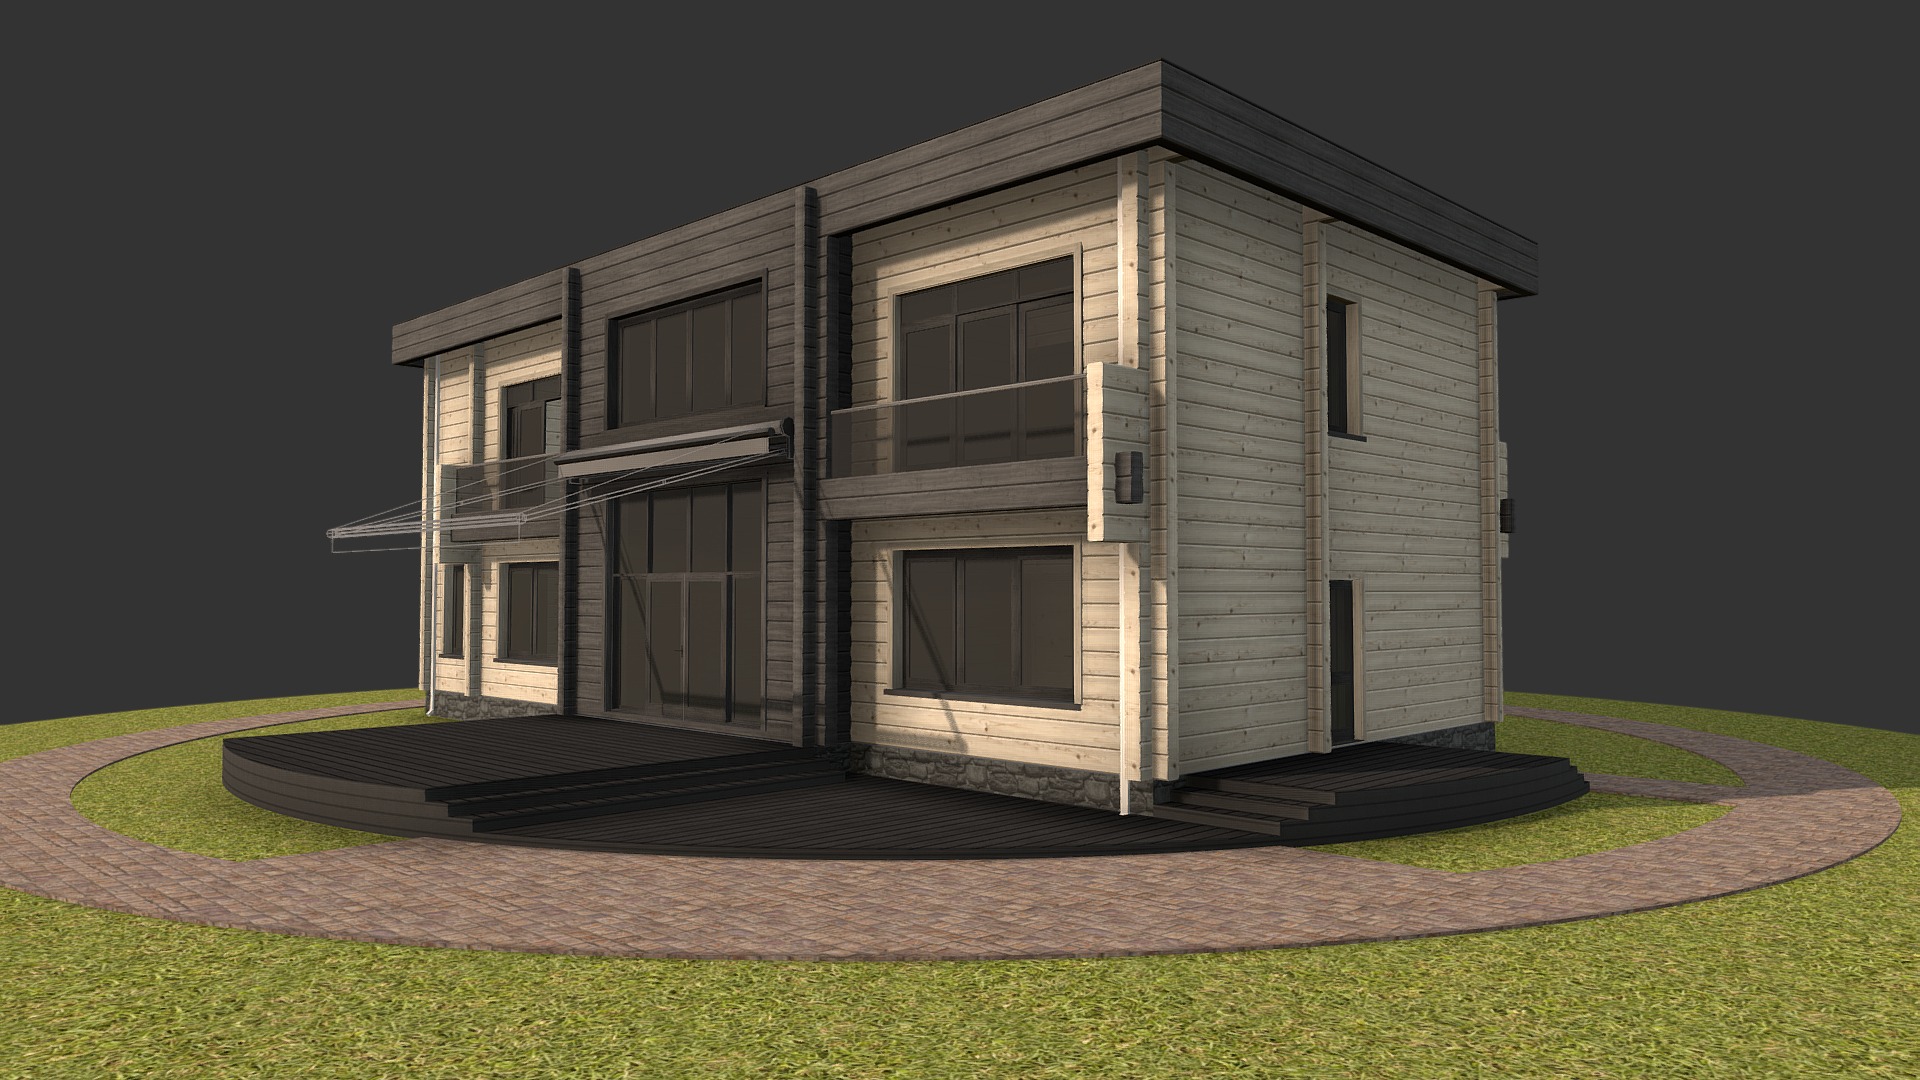 3D model Проект дома 2.0 - This is a 3D model of the Проект дома 2.0. The 3D model is about a house with a driveway.